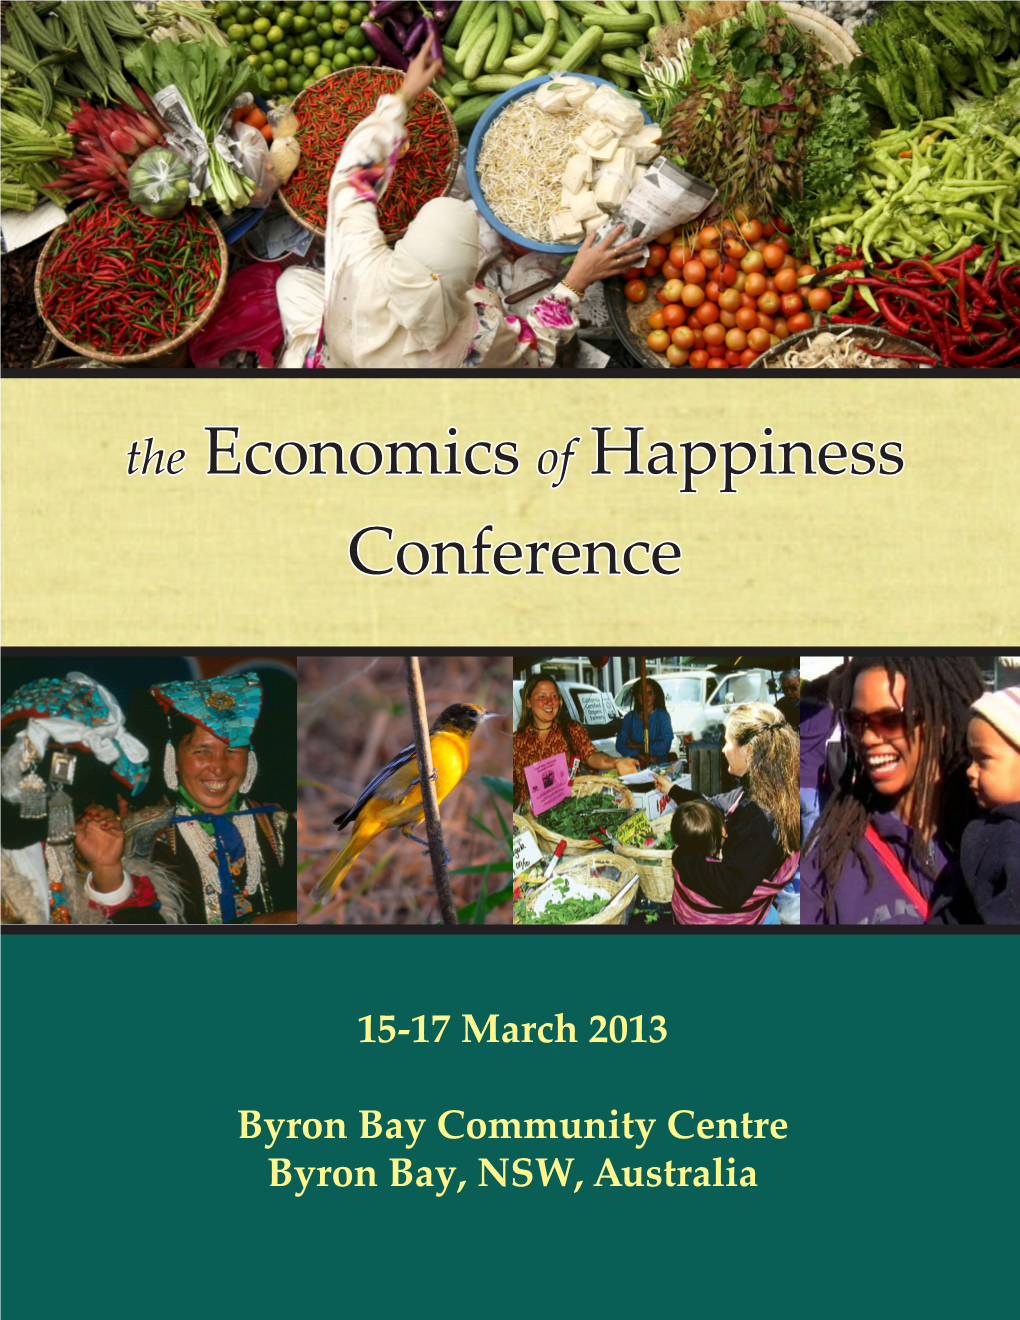 The Economics of Happiness Conference